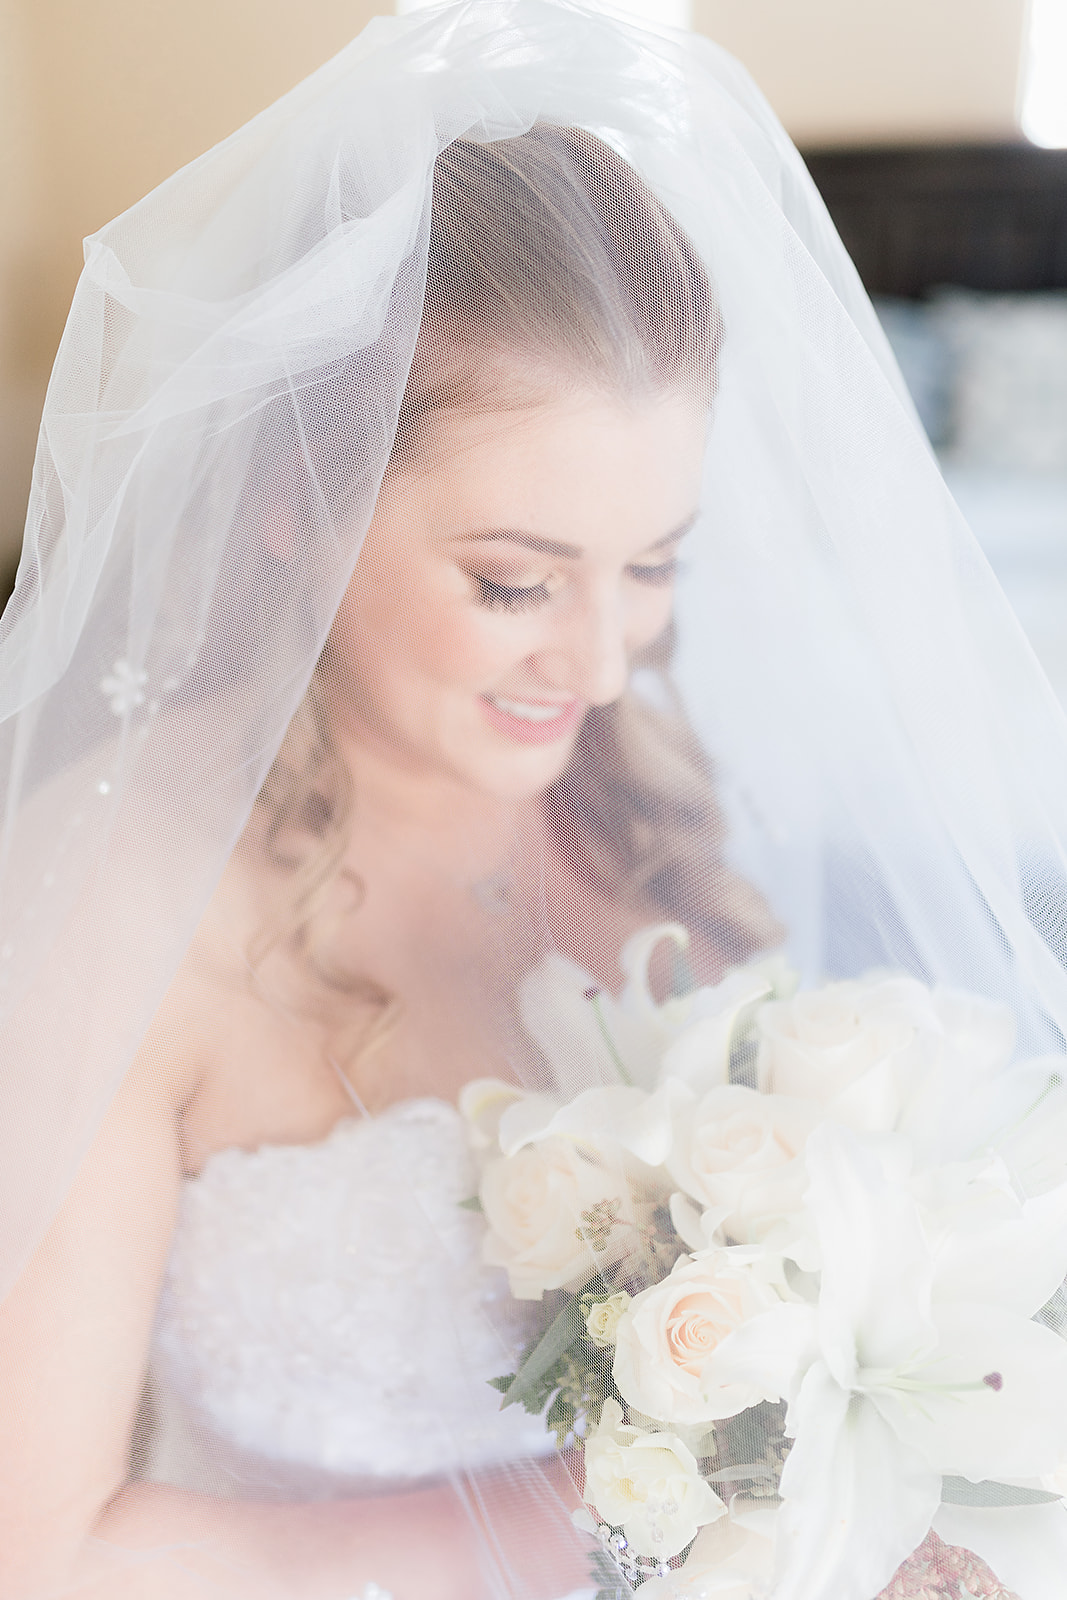 7 Questions To Ask When Hiring A Wedding Makeup Artist | Makeup in the 702